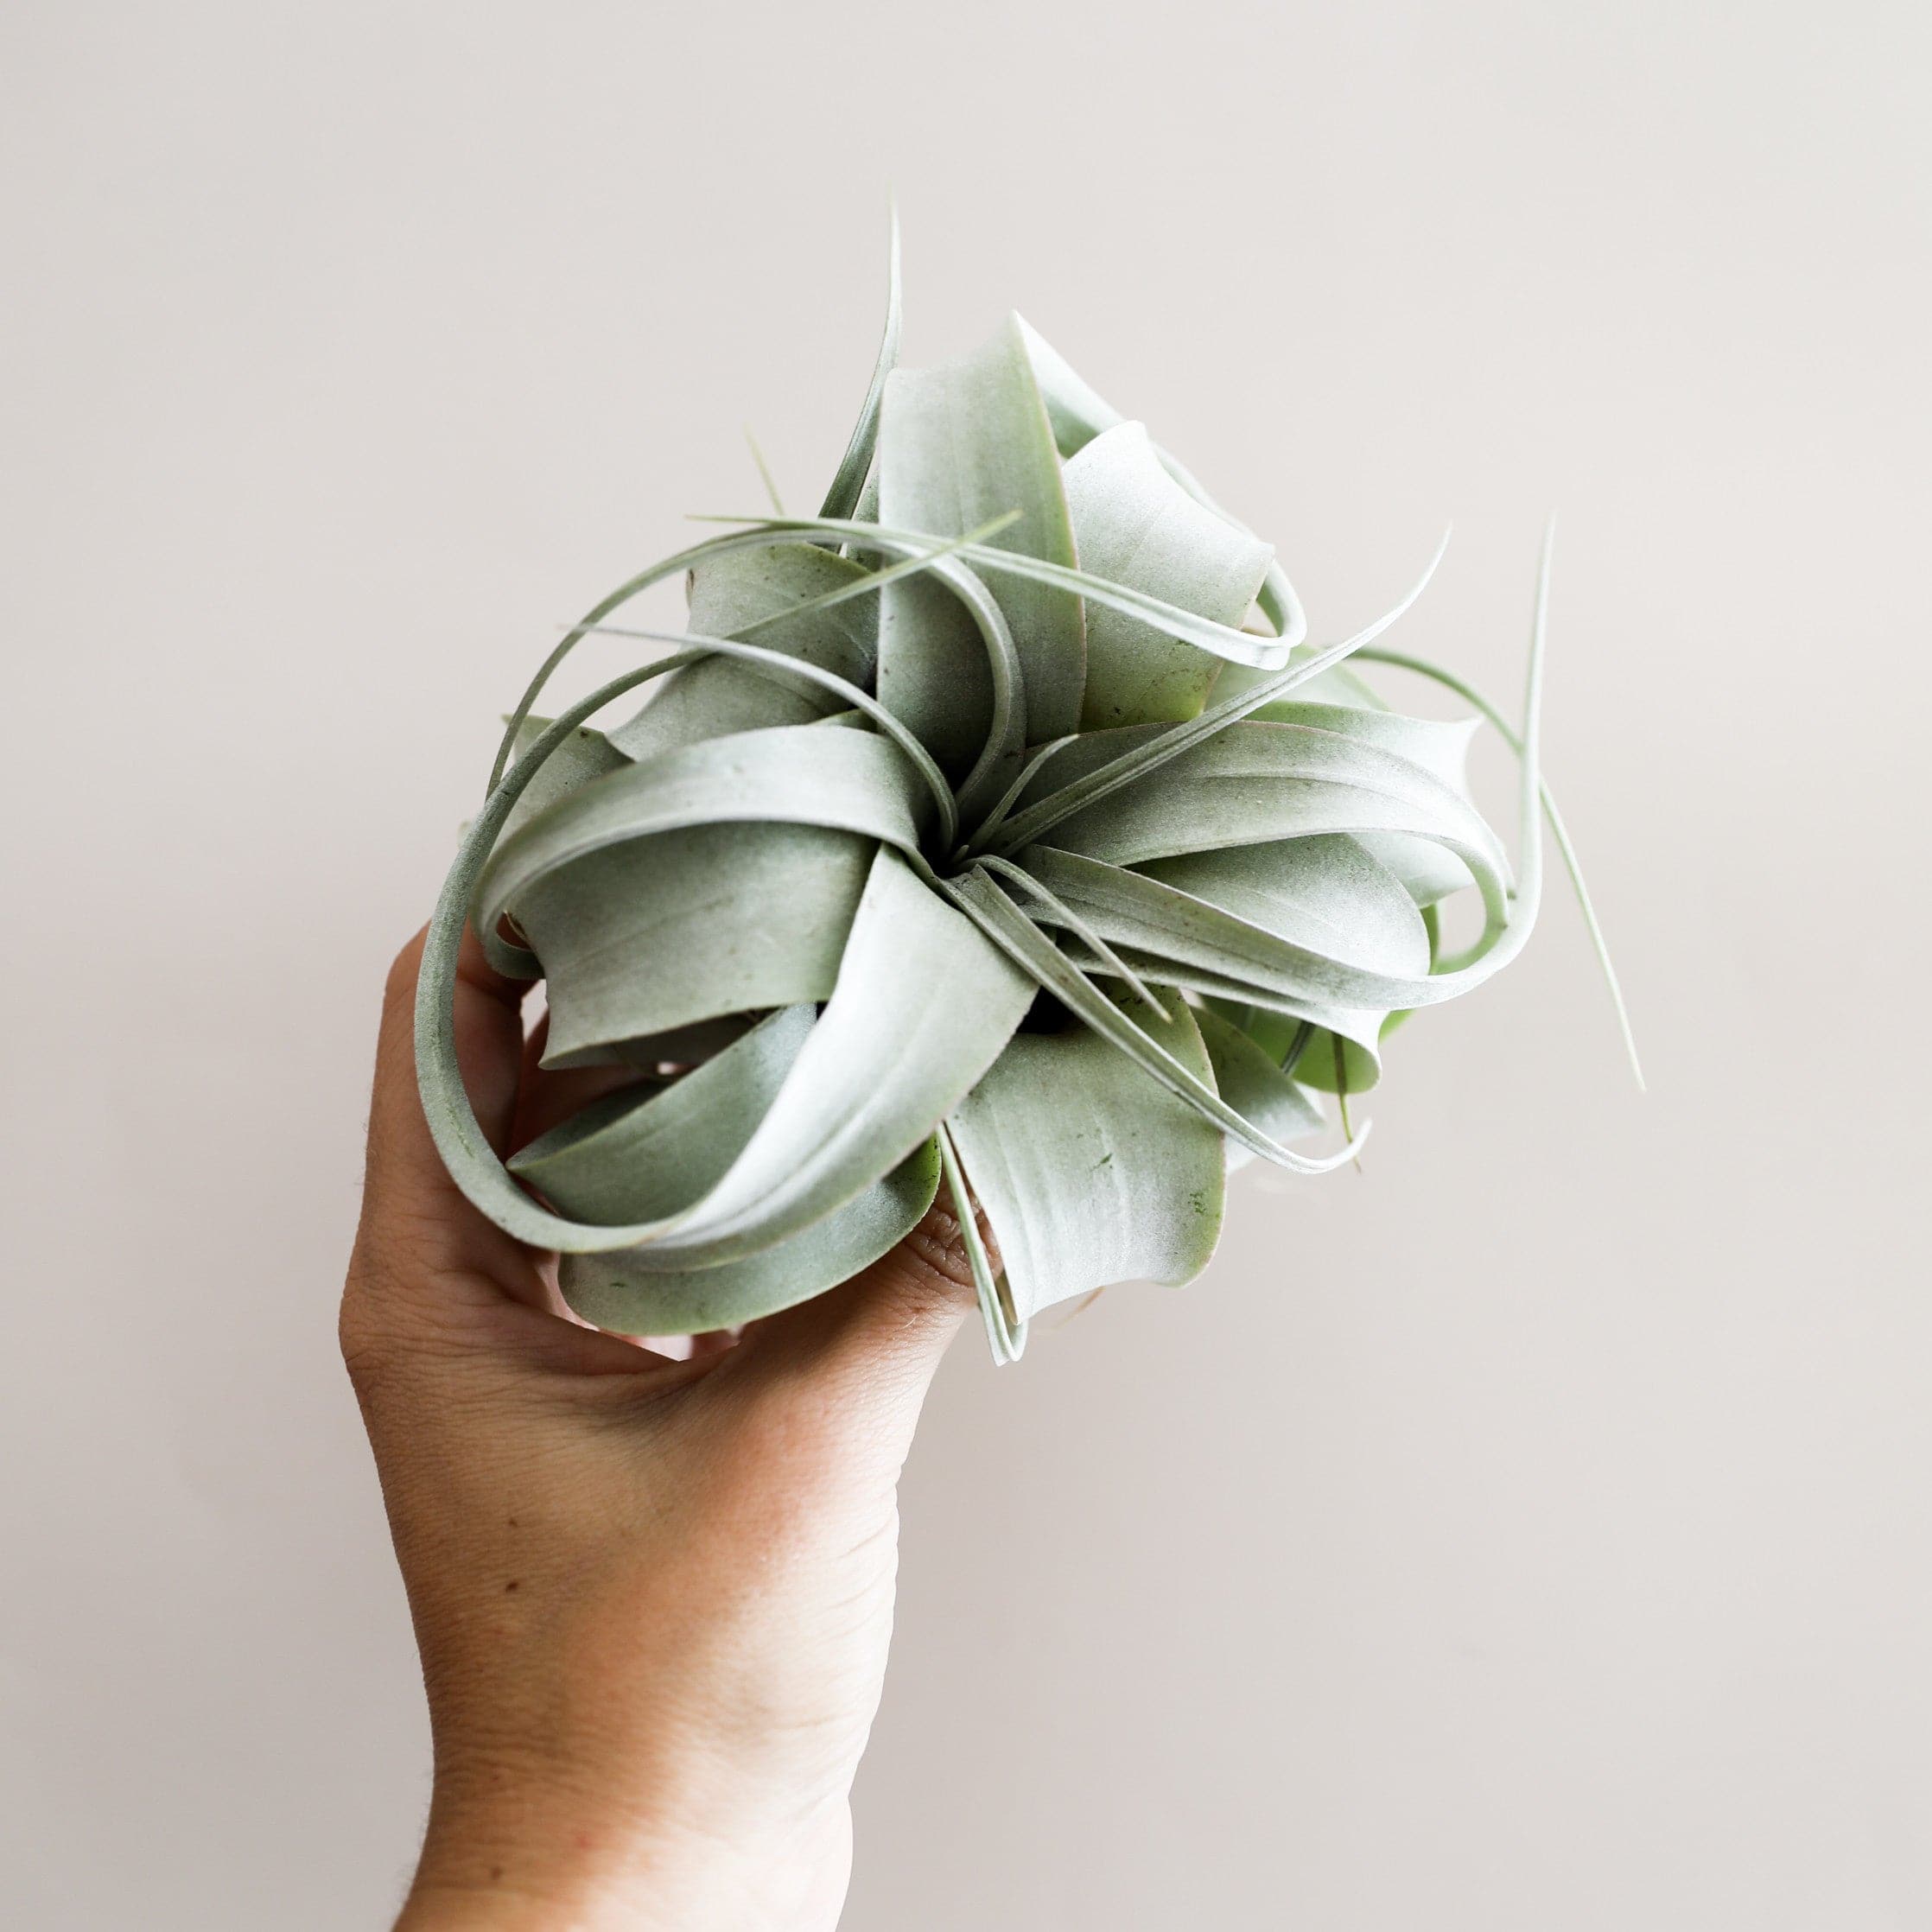 This plant has pale green and slender triangle leaves that grow in a rosette pattern with new growth coming from the center of the plant. The leaves of this plant has large whimsy leaves that curl in a spiral.